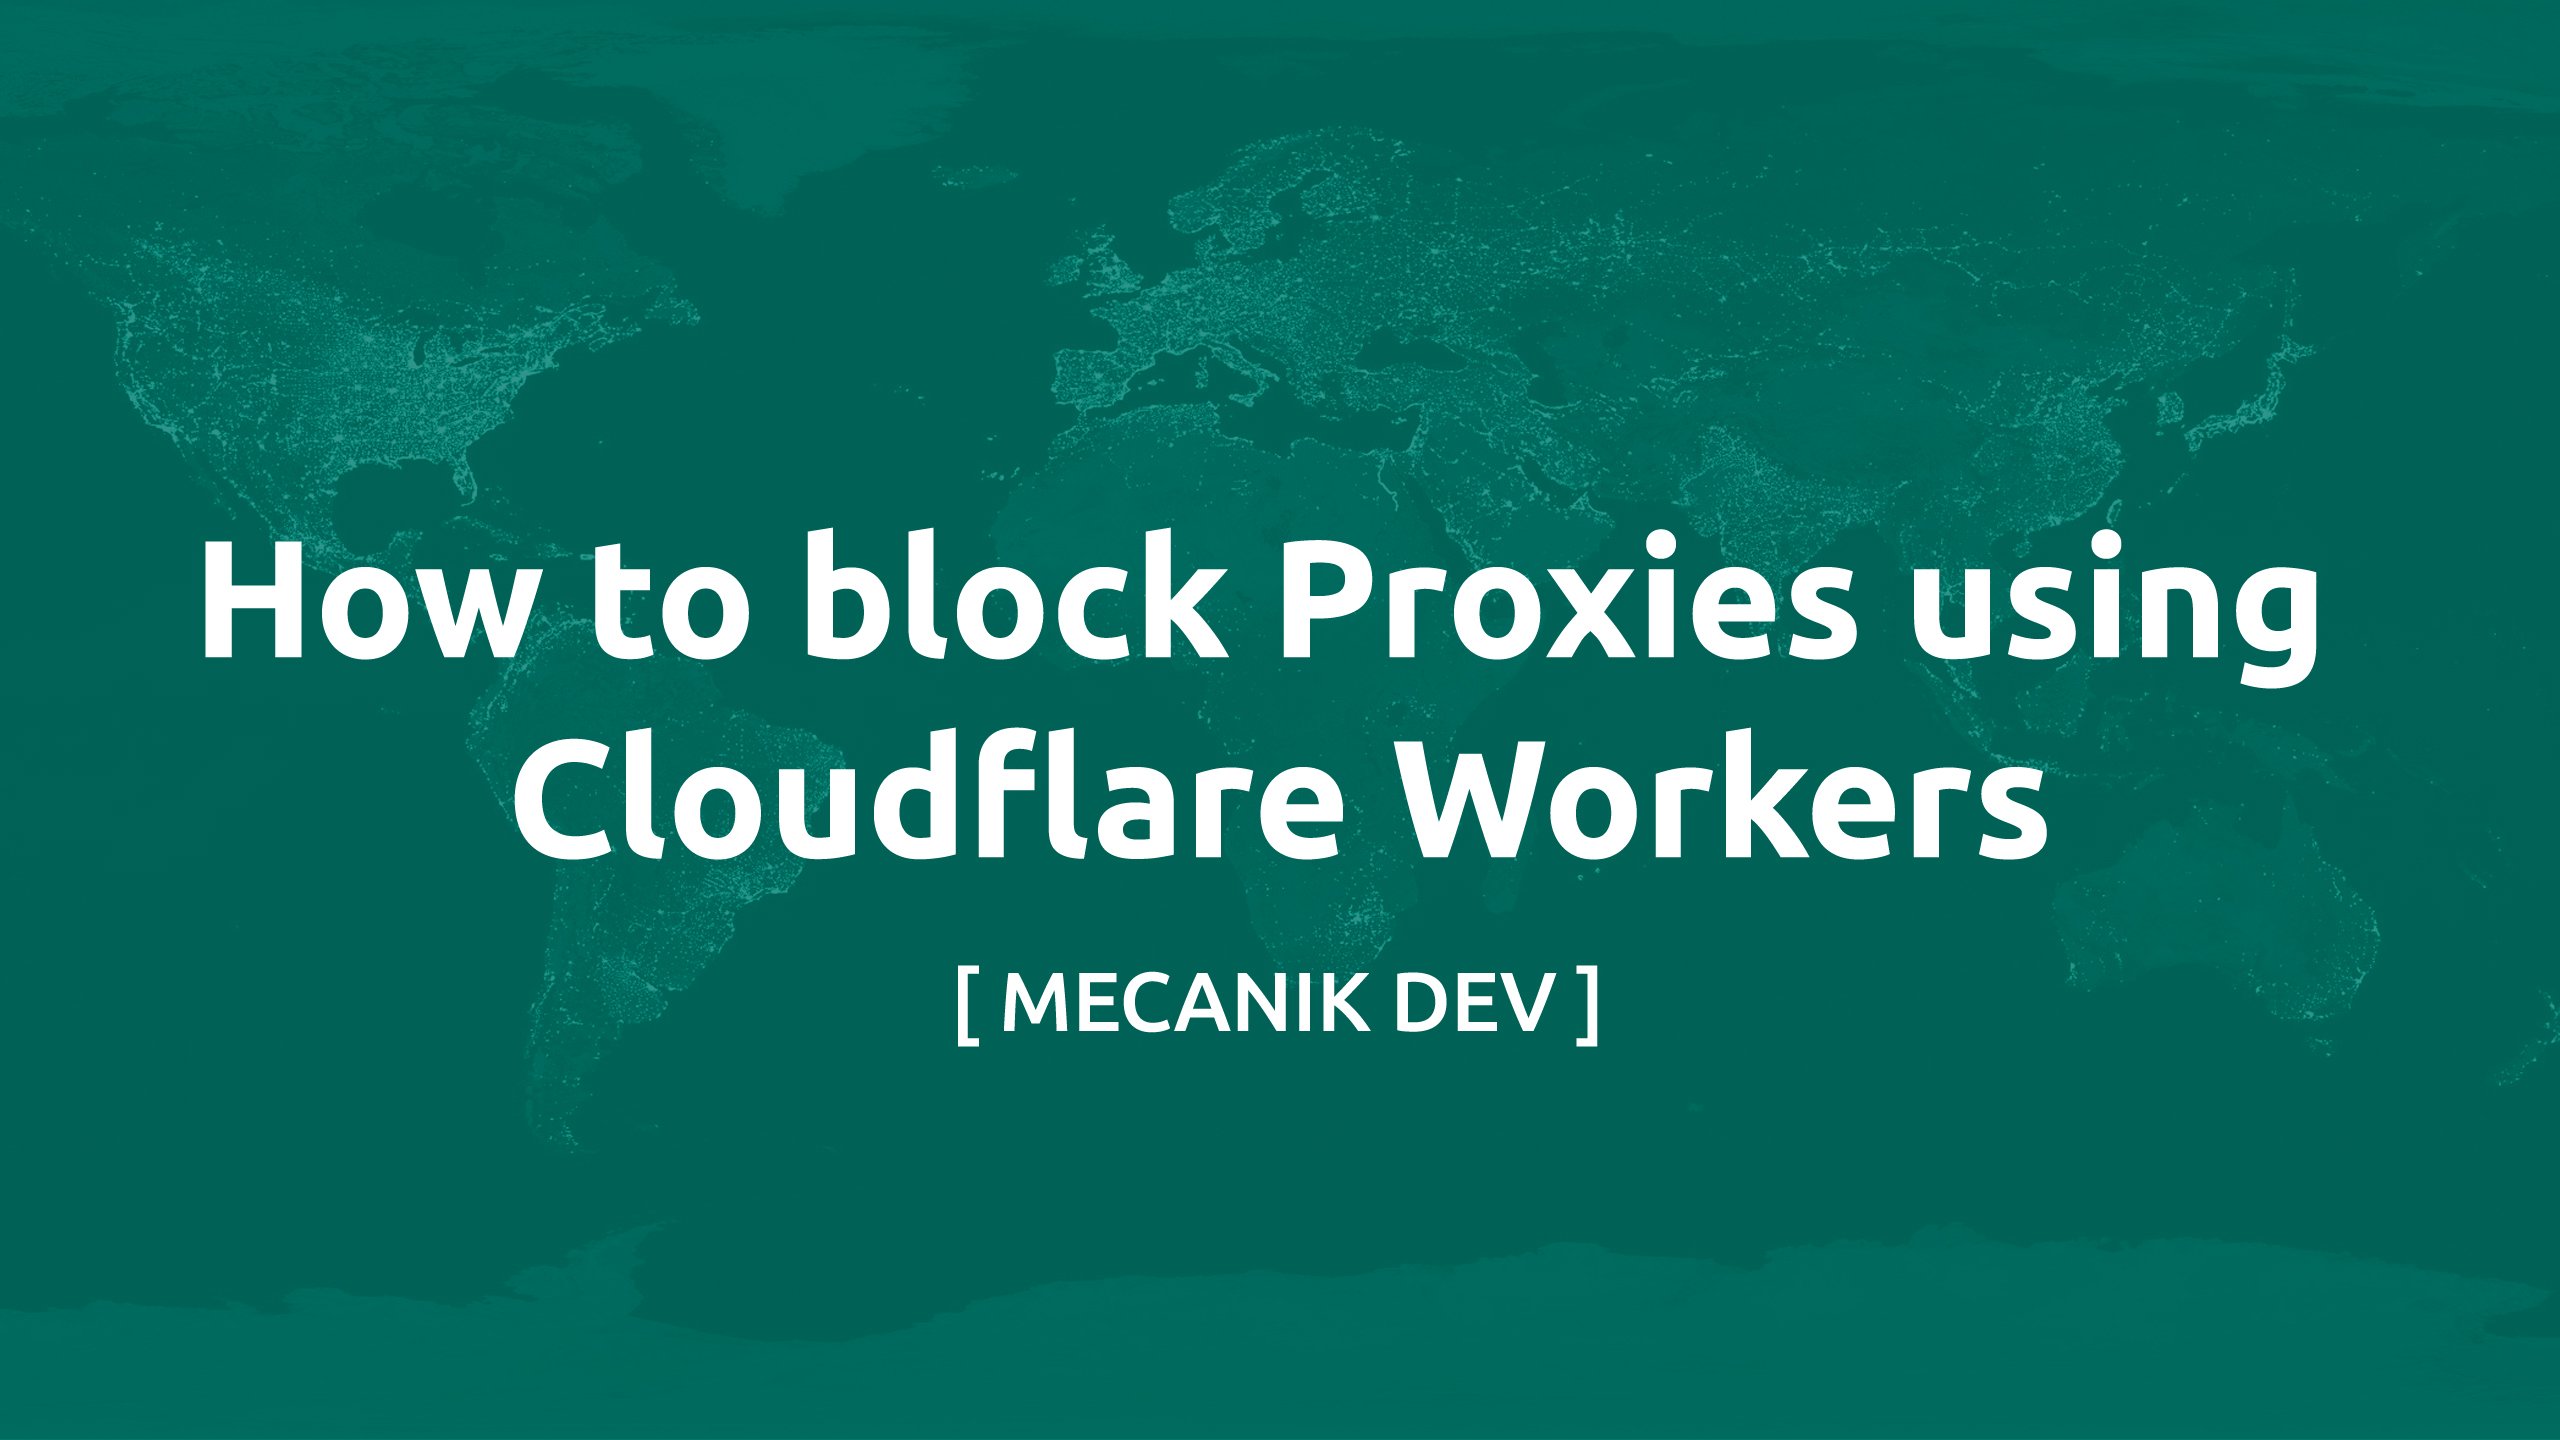 How to block Proxies using Cloudflare Workers